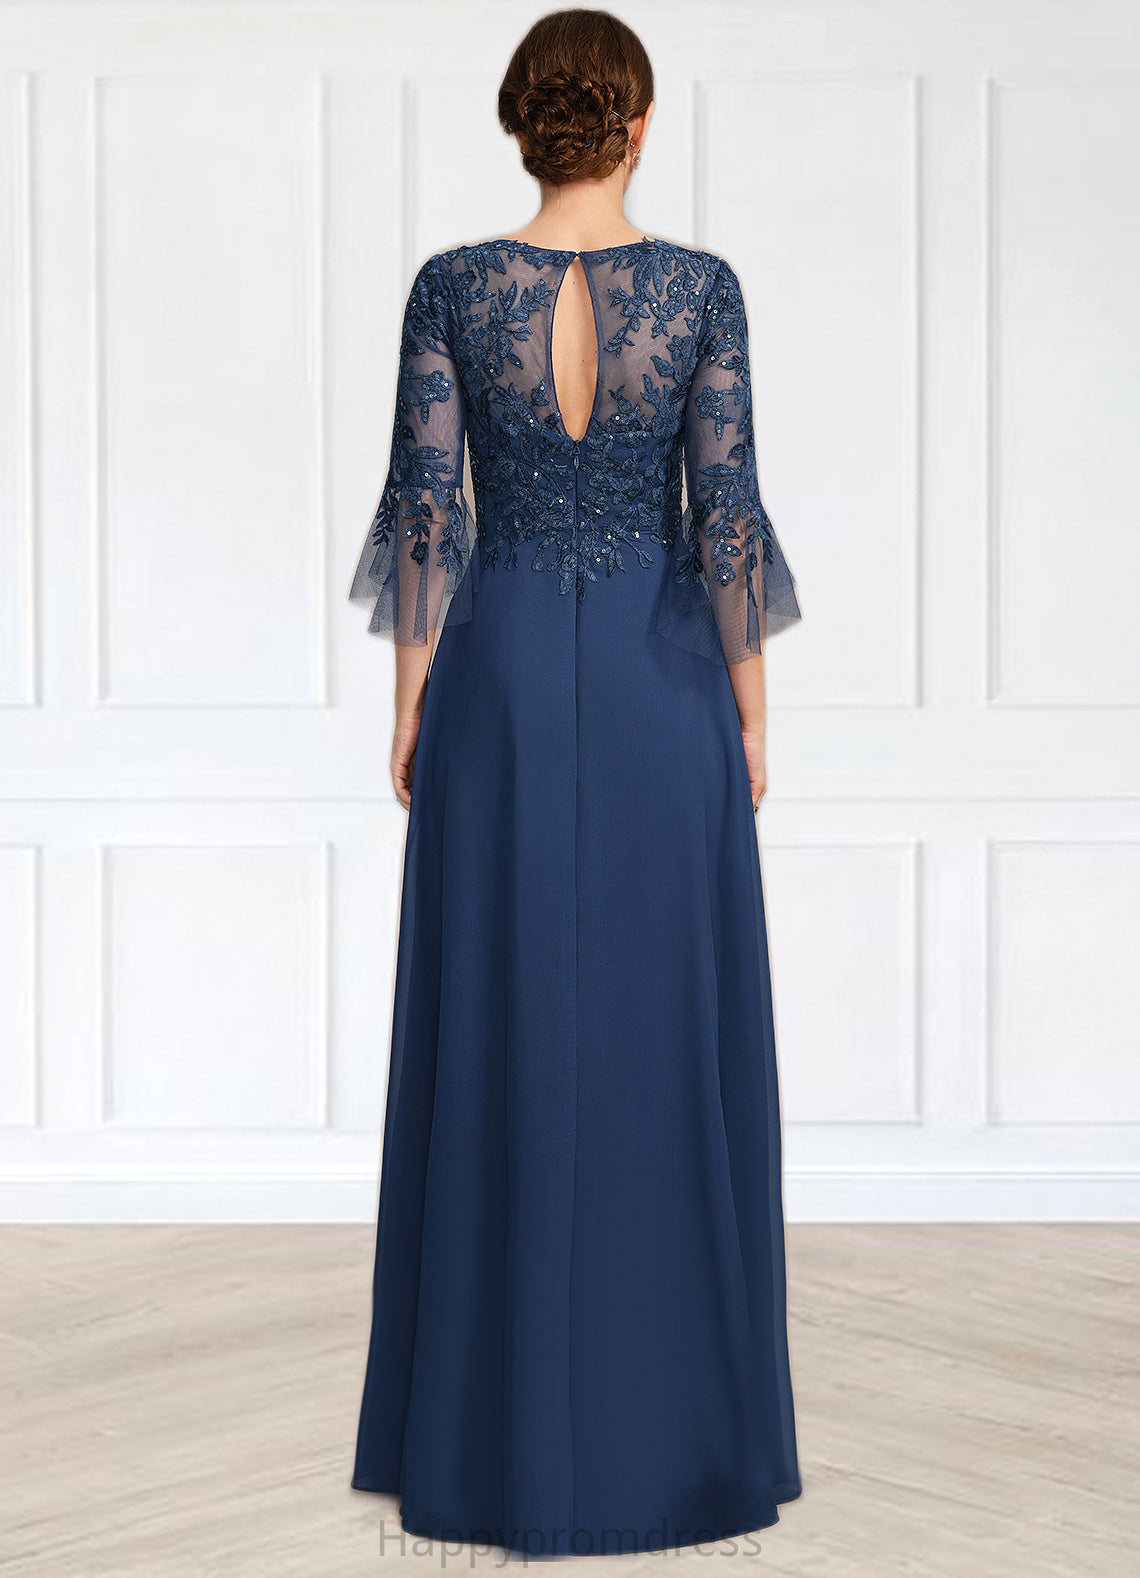 Seraphina A-line Scoop Illusion Floor-Length Chiffon Lace Mother of the Bride Dress With Cascading Ruffles Sequins XXSP0021671